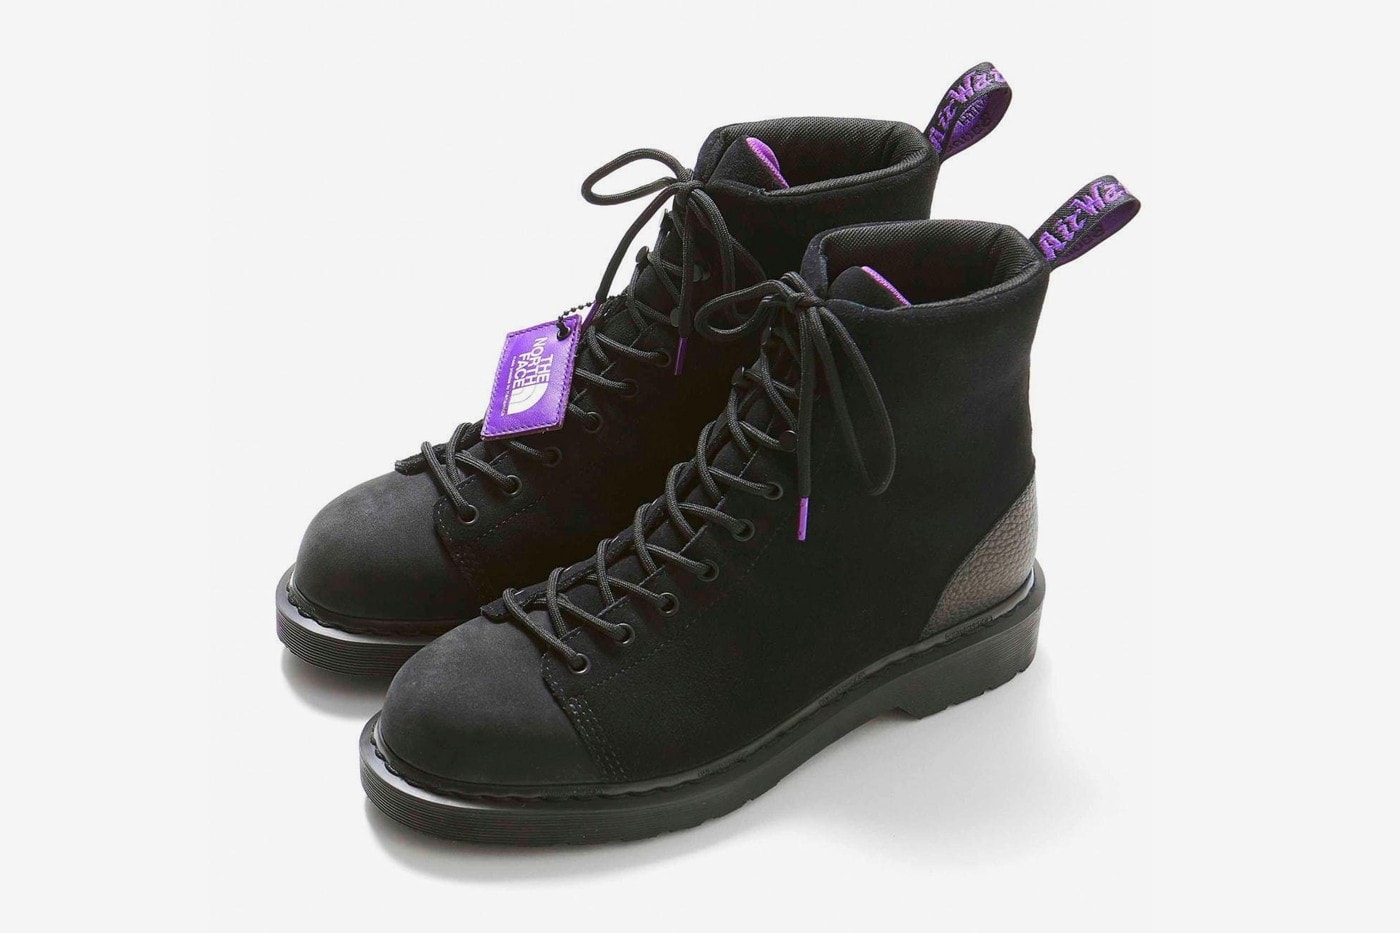 THE NORTH FACE PURPLE LABEL x Dr. Martens 全新絨面革聯乘靴款發佈